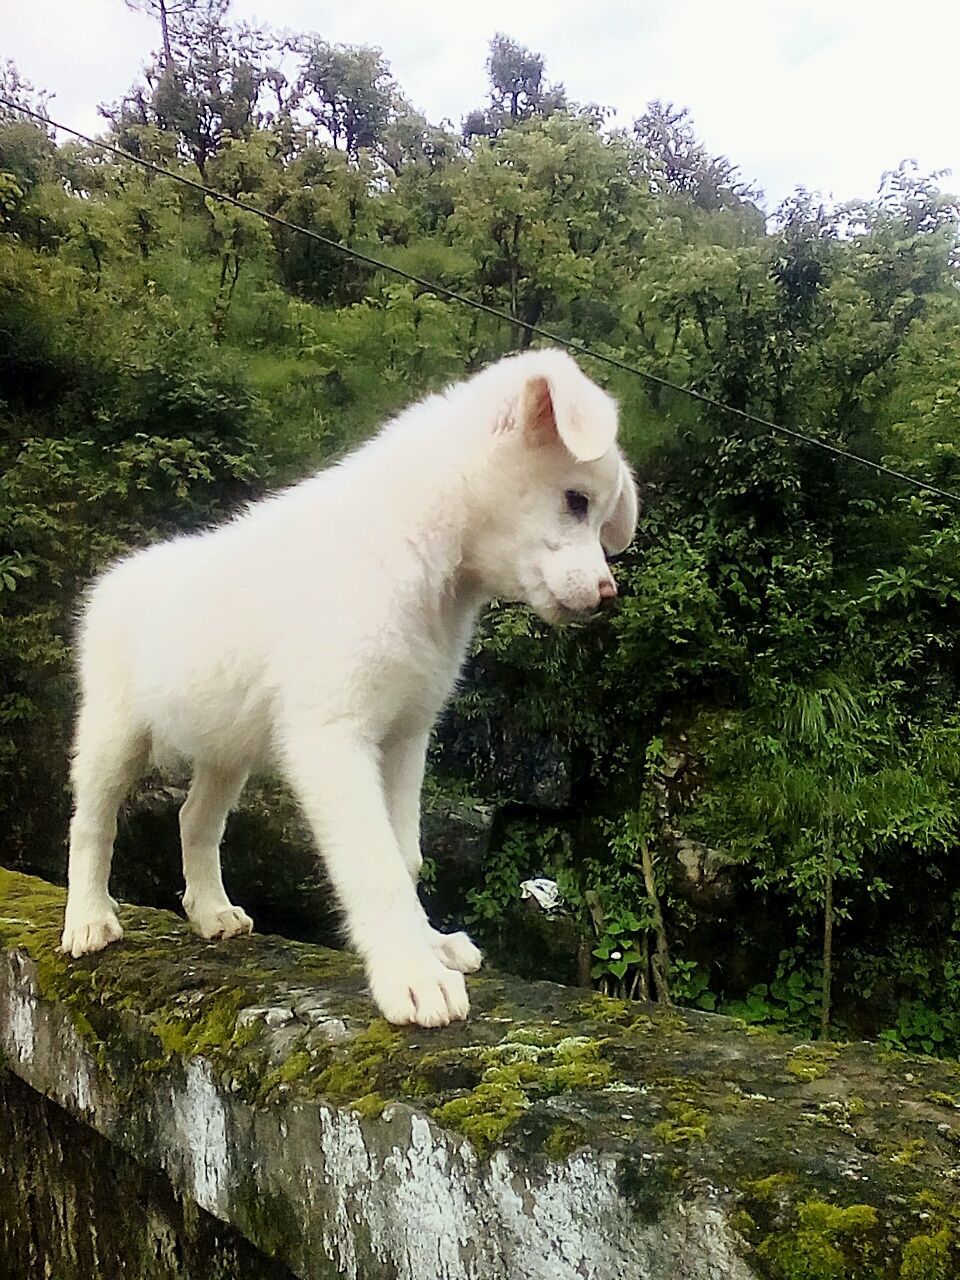 Close-up of puppy standing on retaining wall against trees